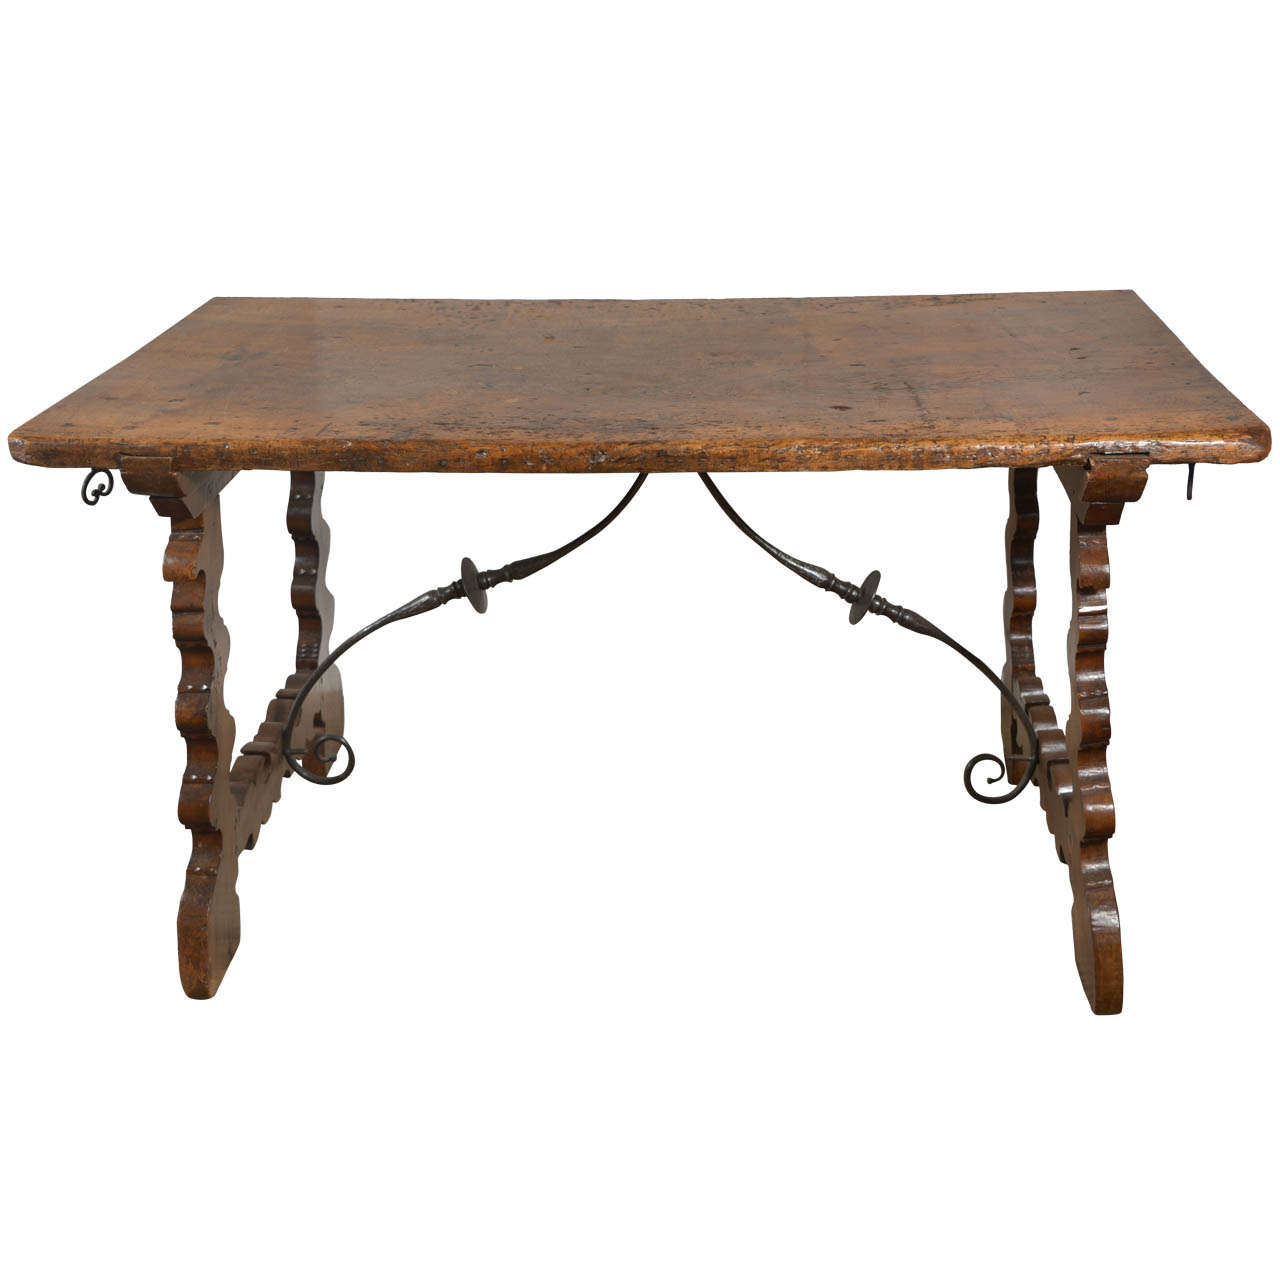 Early 19th Century Spanish Iron Strap Table